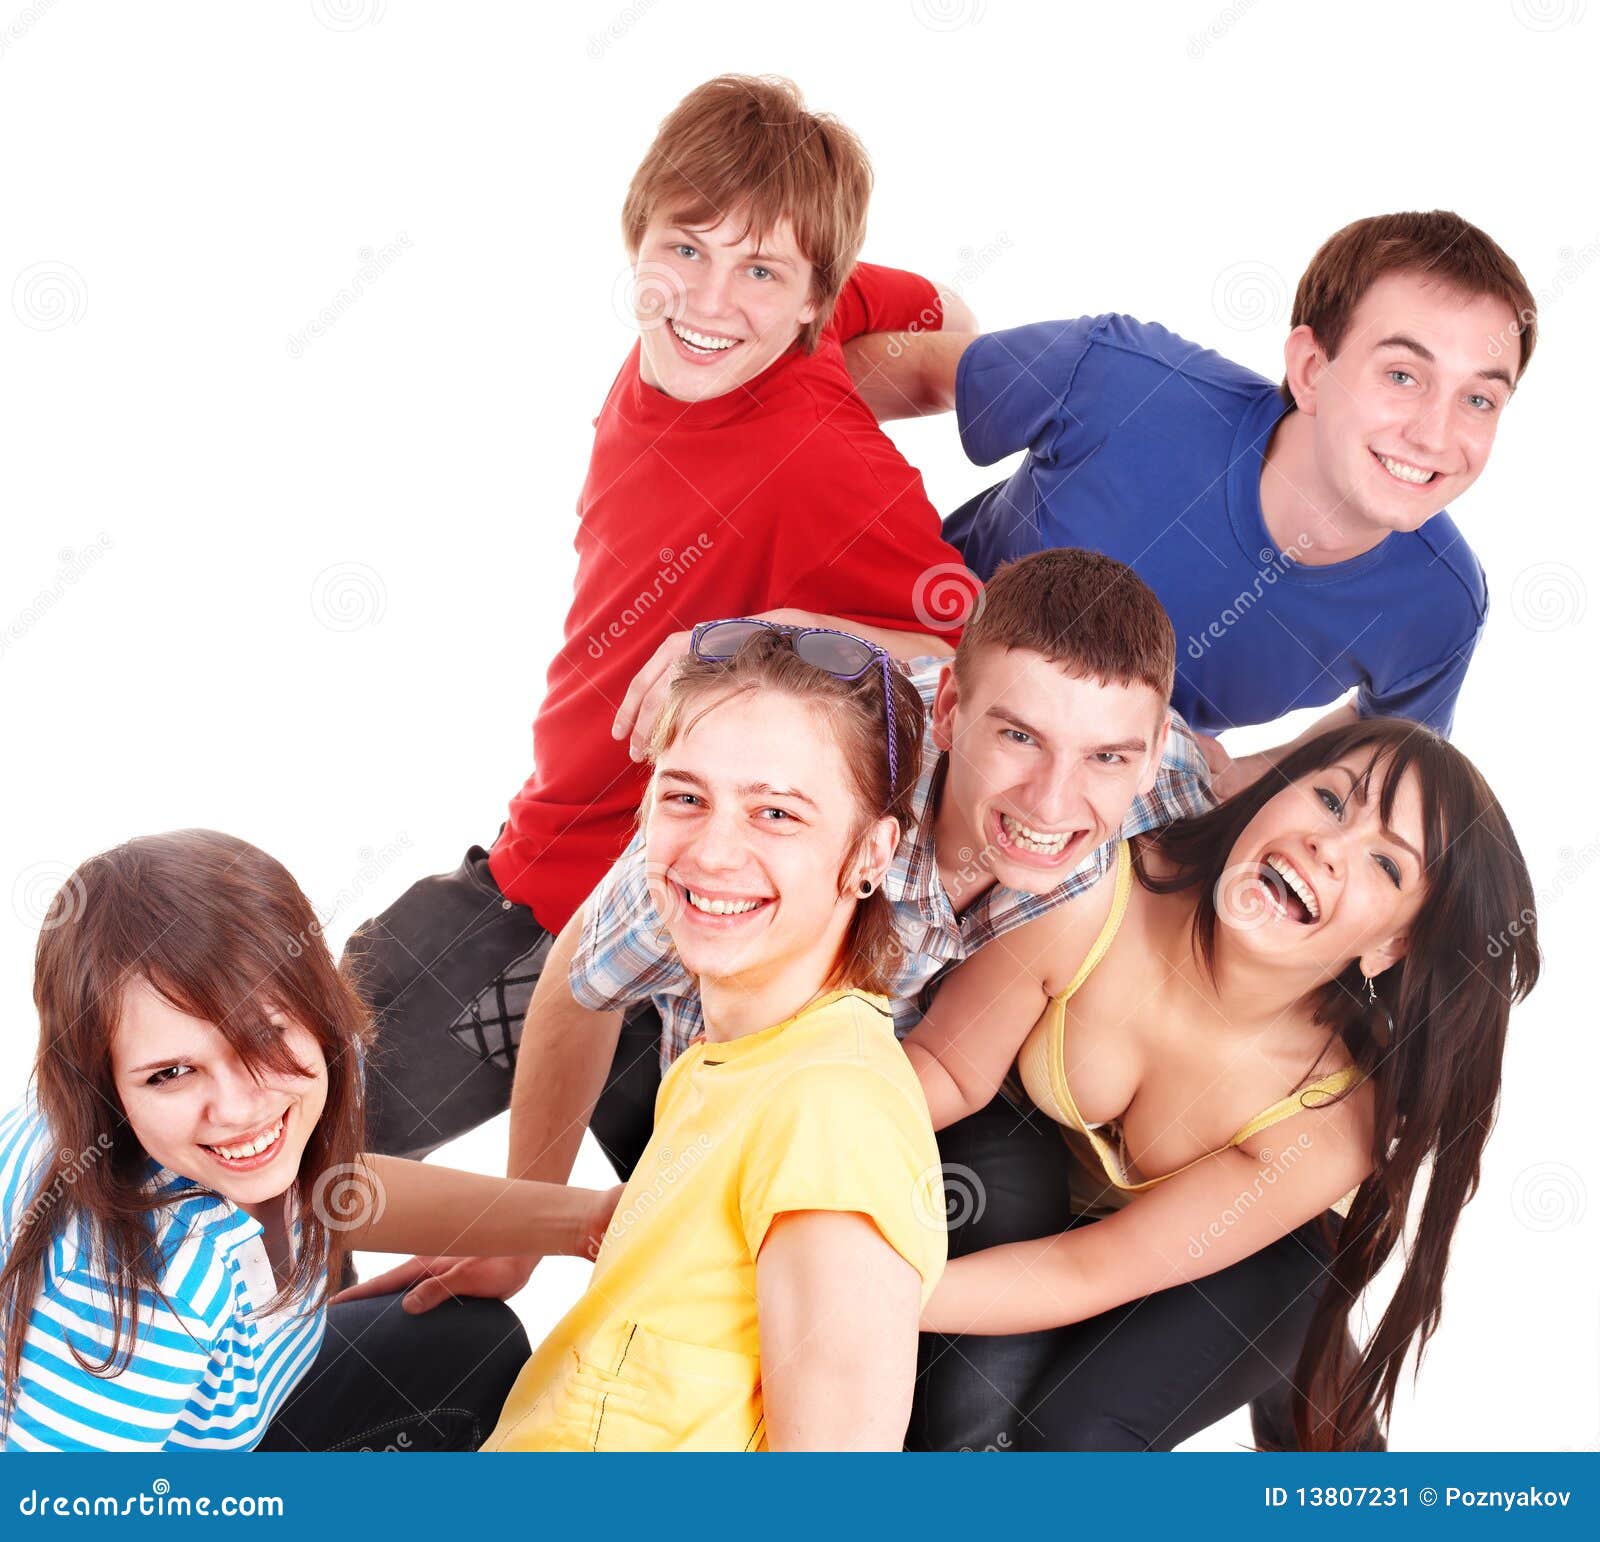 group-happy-young-people-13807231.jpg